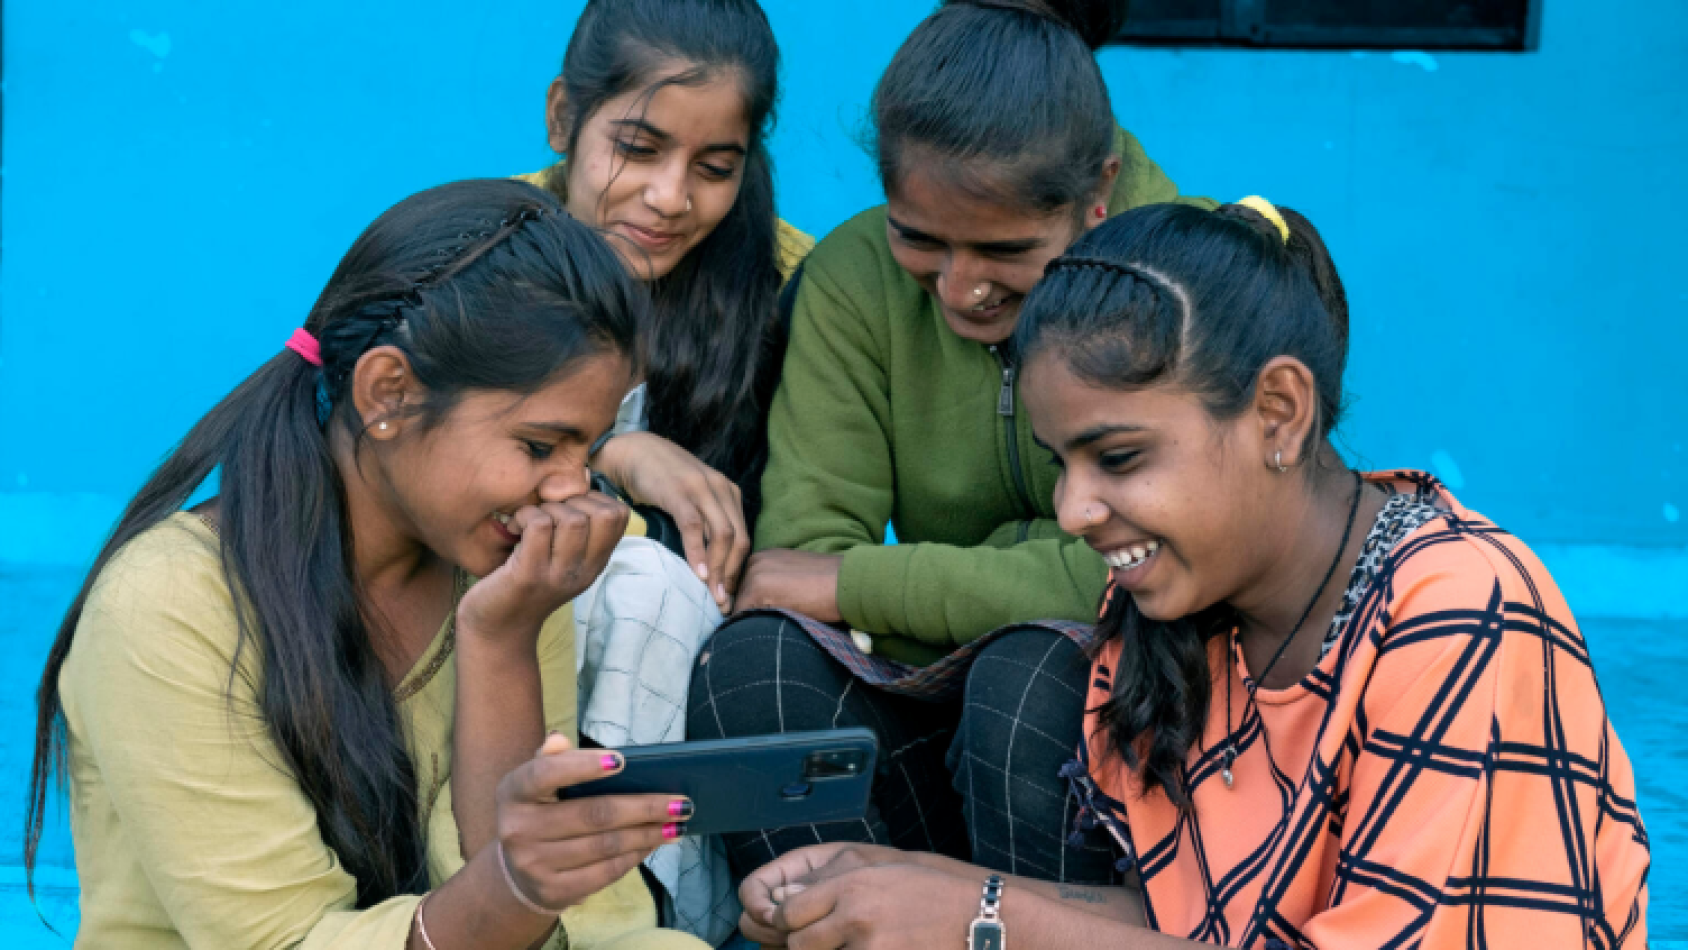 Four girls crowd around a mobile phone giggling